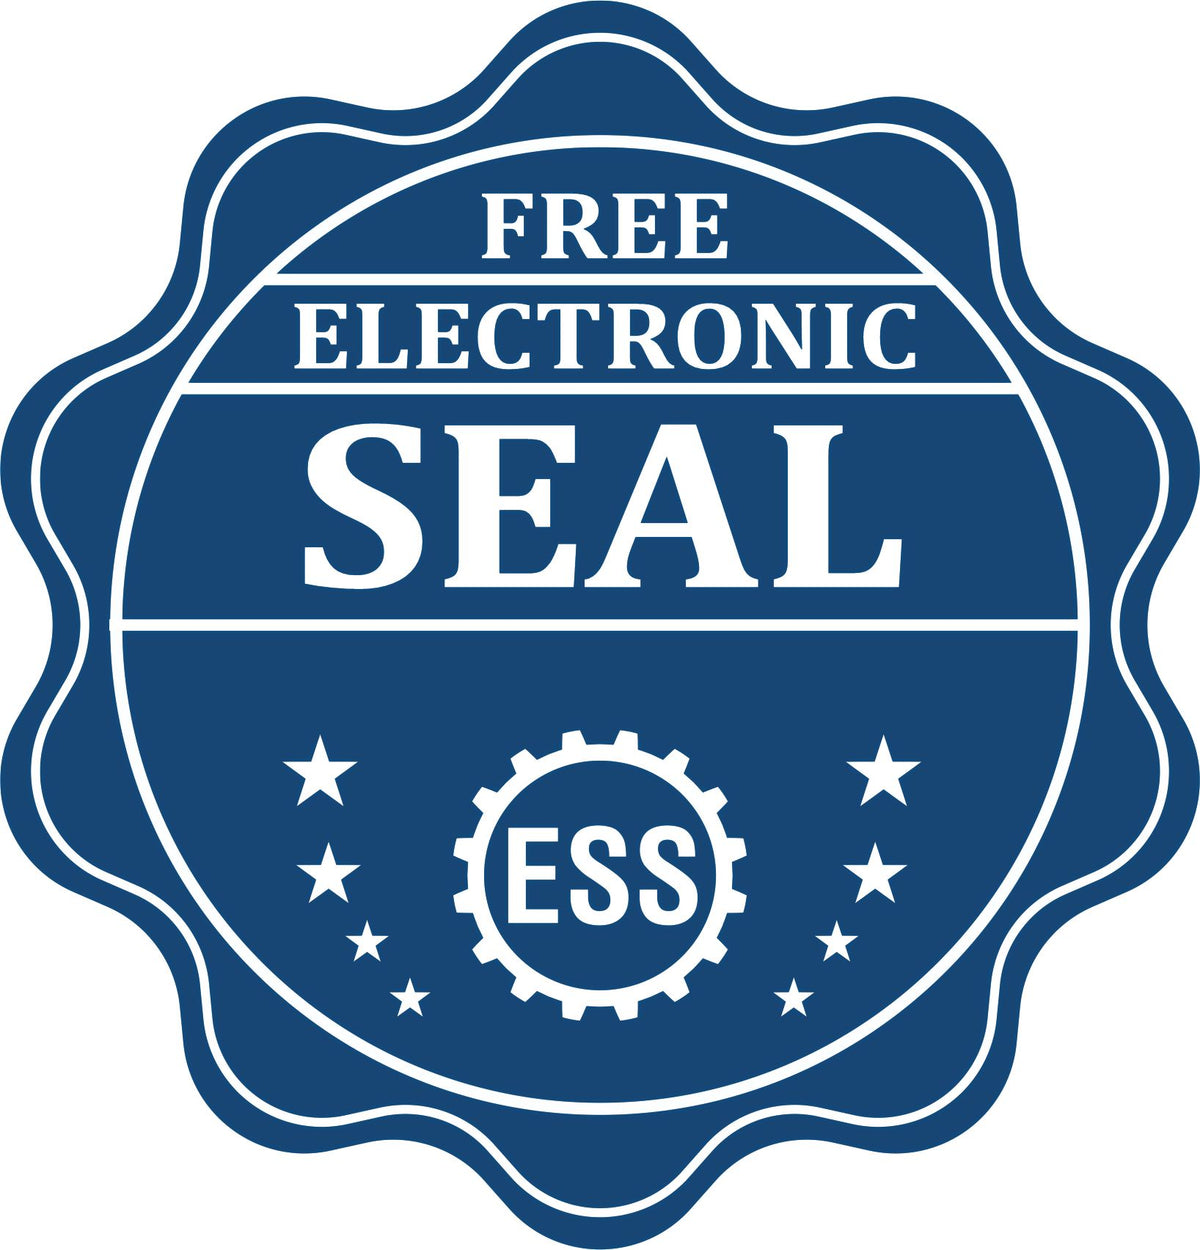 A badge showing a free electronic seal for the Handheld Louisiana Architect Seal Embosser with stars and the ESS gear on the emblem.